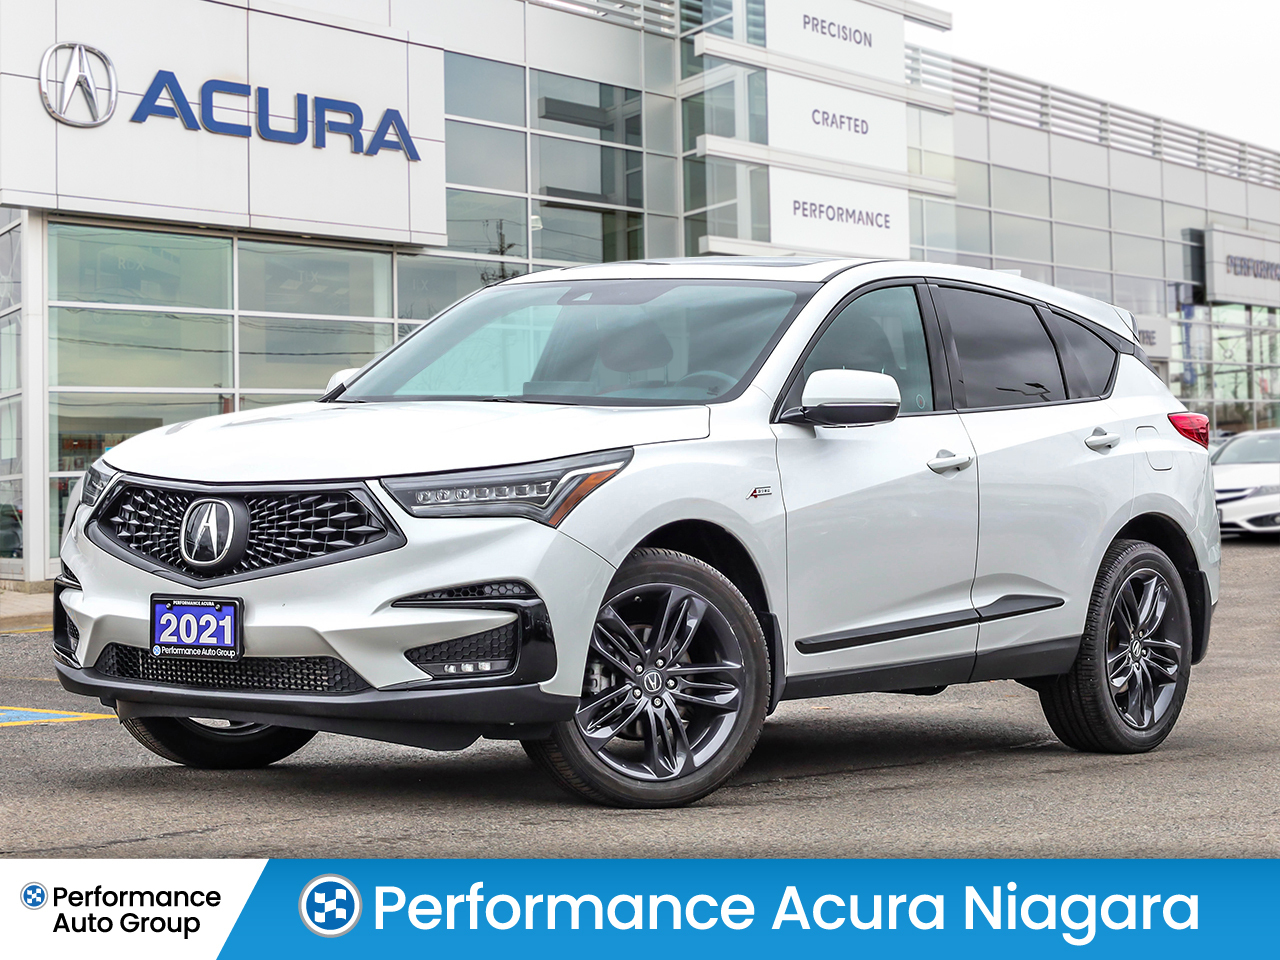 2021 Acura RDX SOLD - PENDING DELIVERY